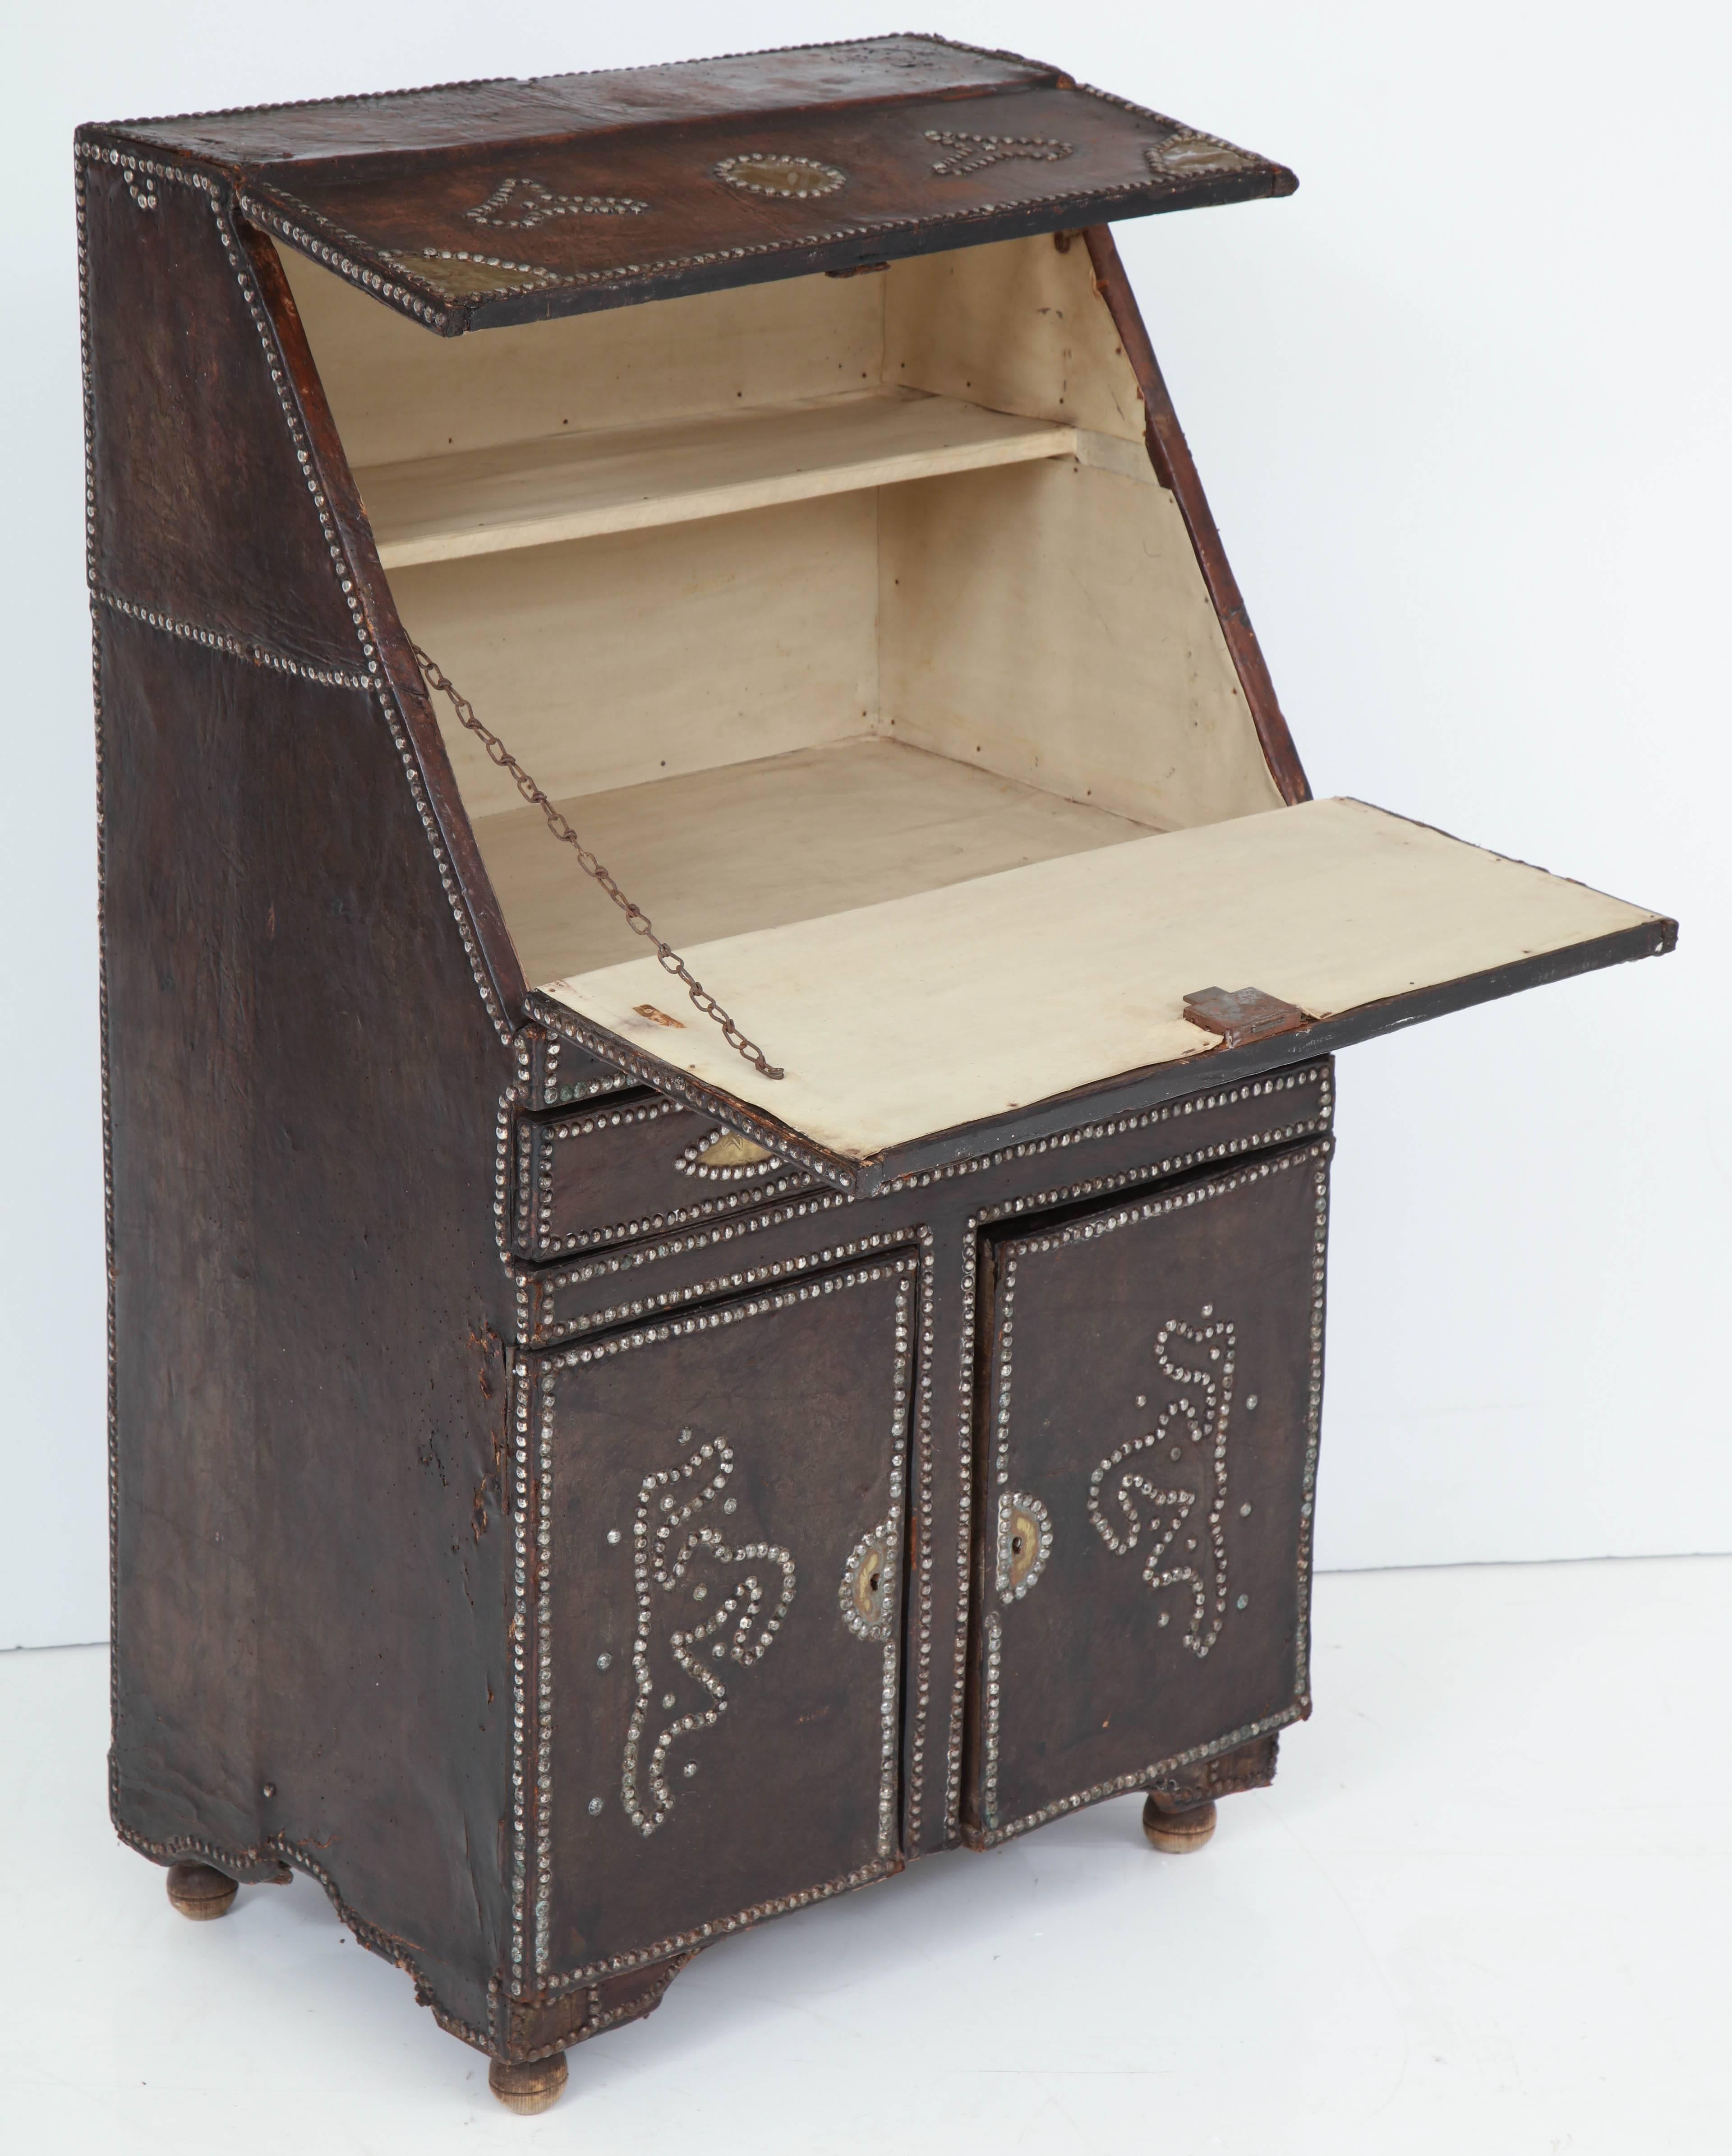 Early 20th Century Leather Covered Desk For Sale